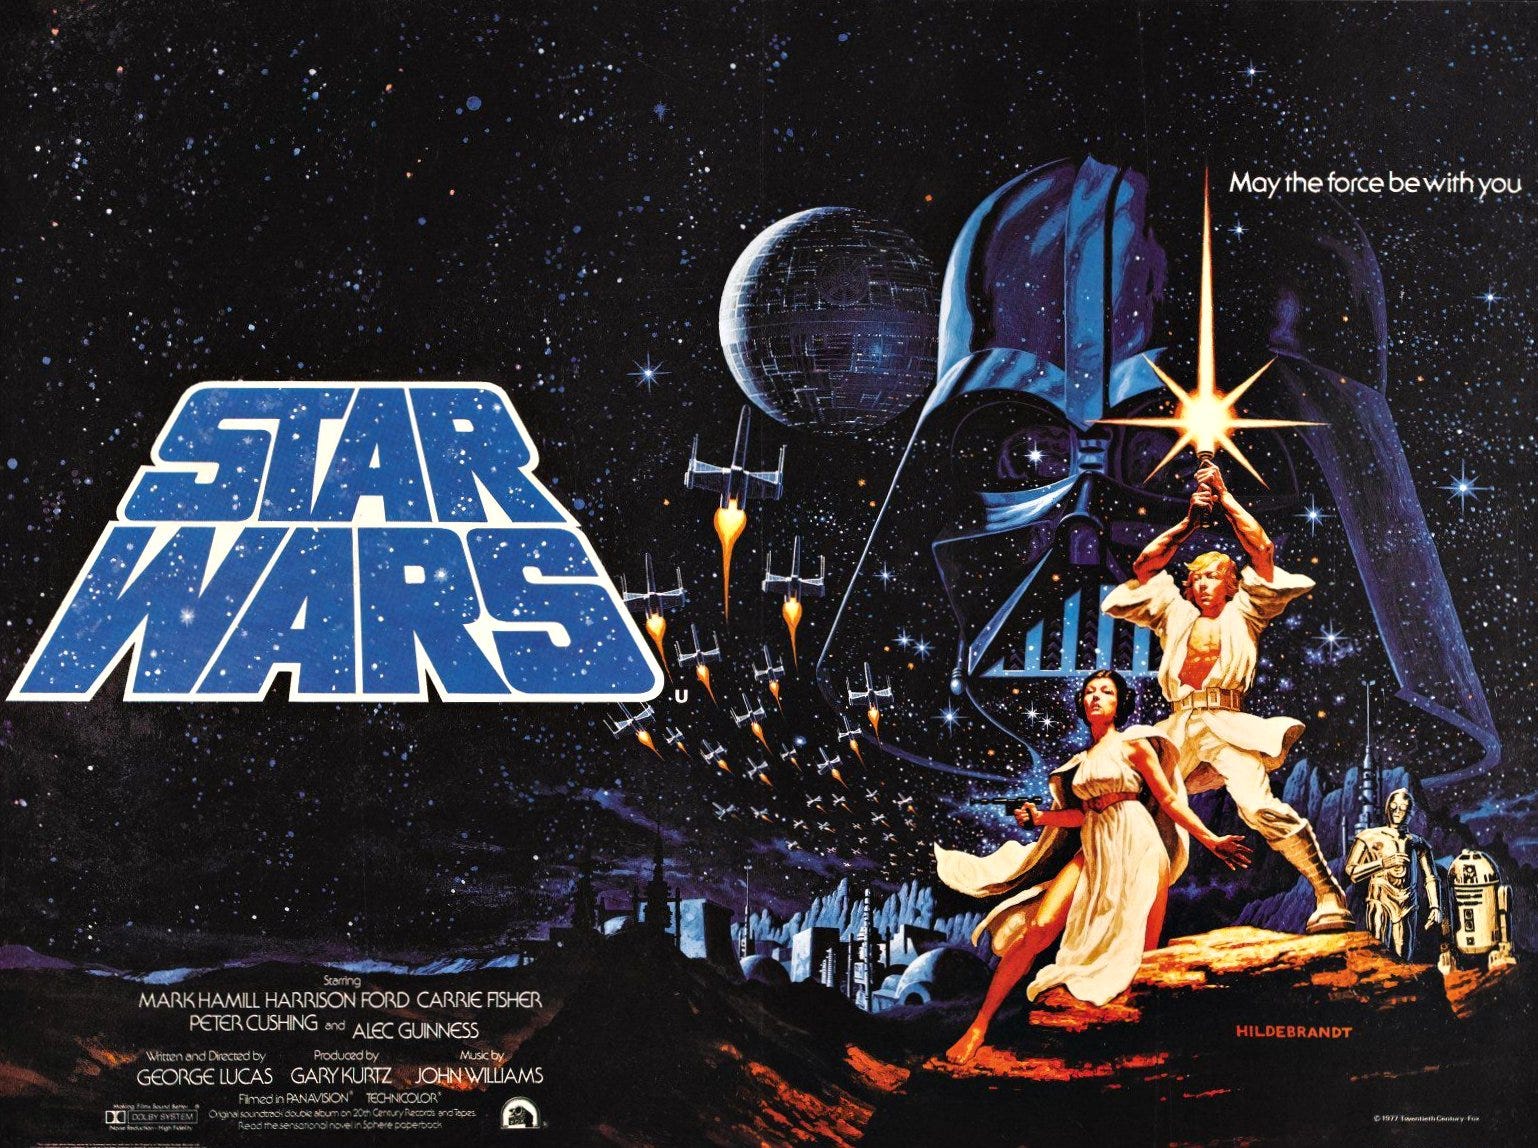 The Definitive Answer to 'Is Star Wars Science Fiction or Fantasy